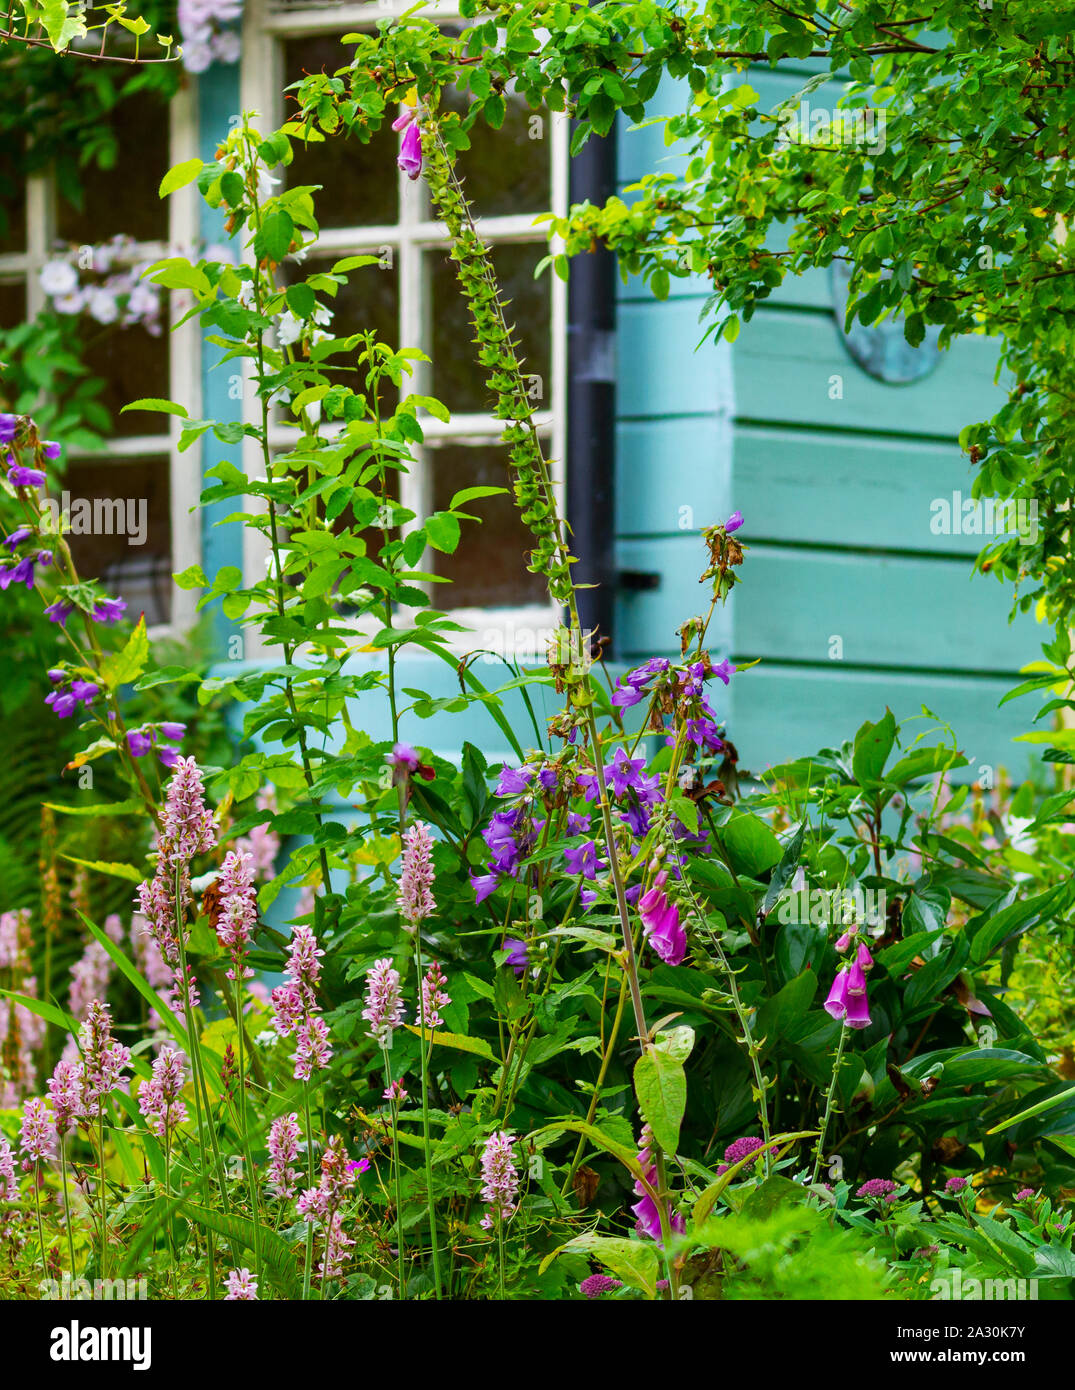 Garden flowers, Persicaria Knotweed, Campanula Bellflowers and Foxgloves Digitalis blooming growing in garden with blue timber and glass garden buildi Stock Photo